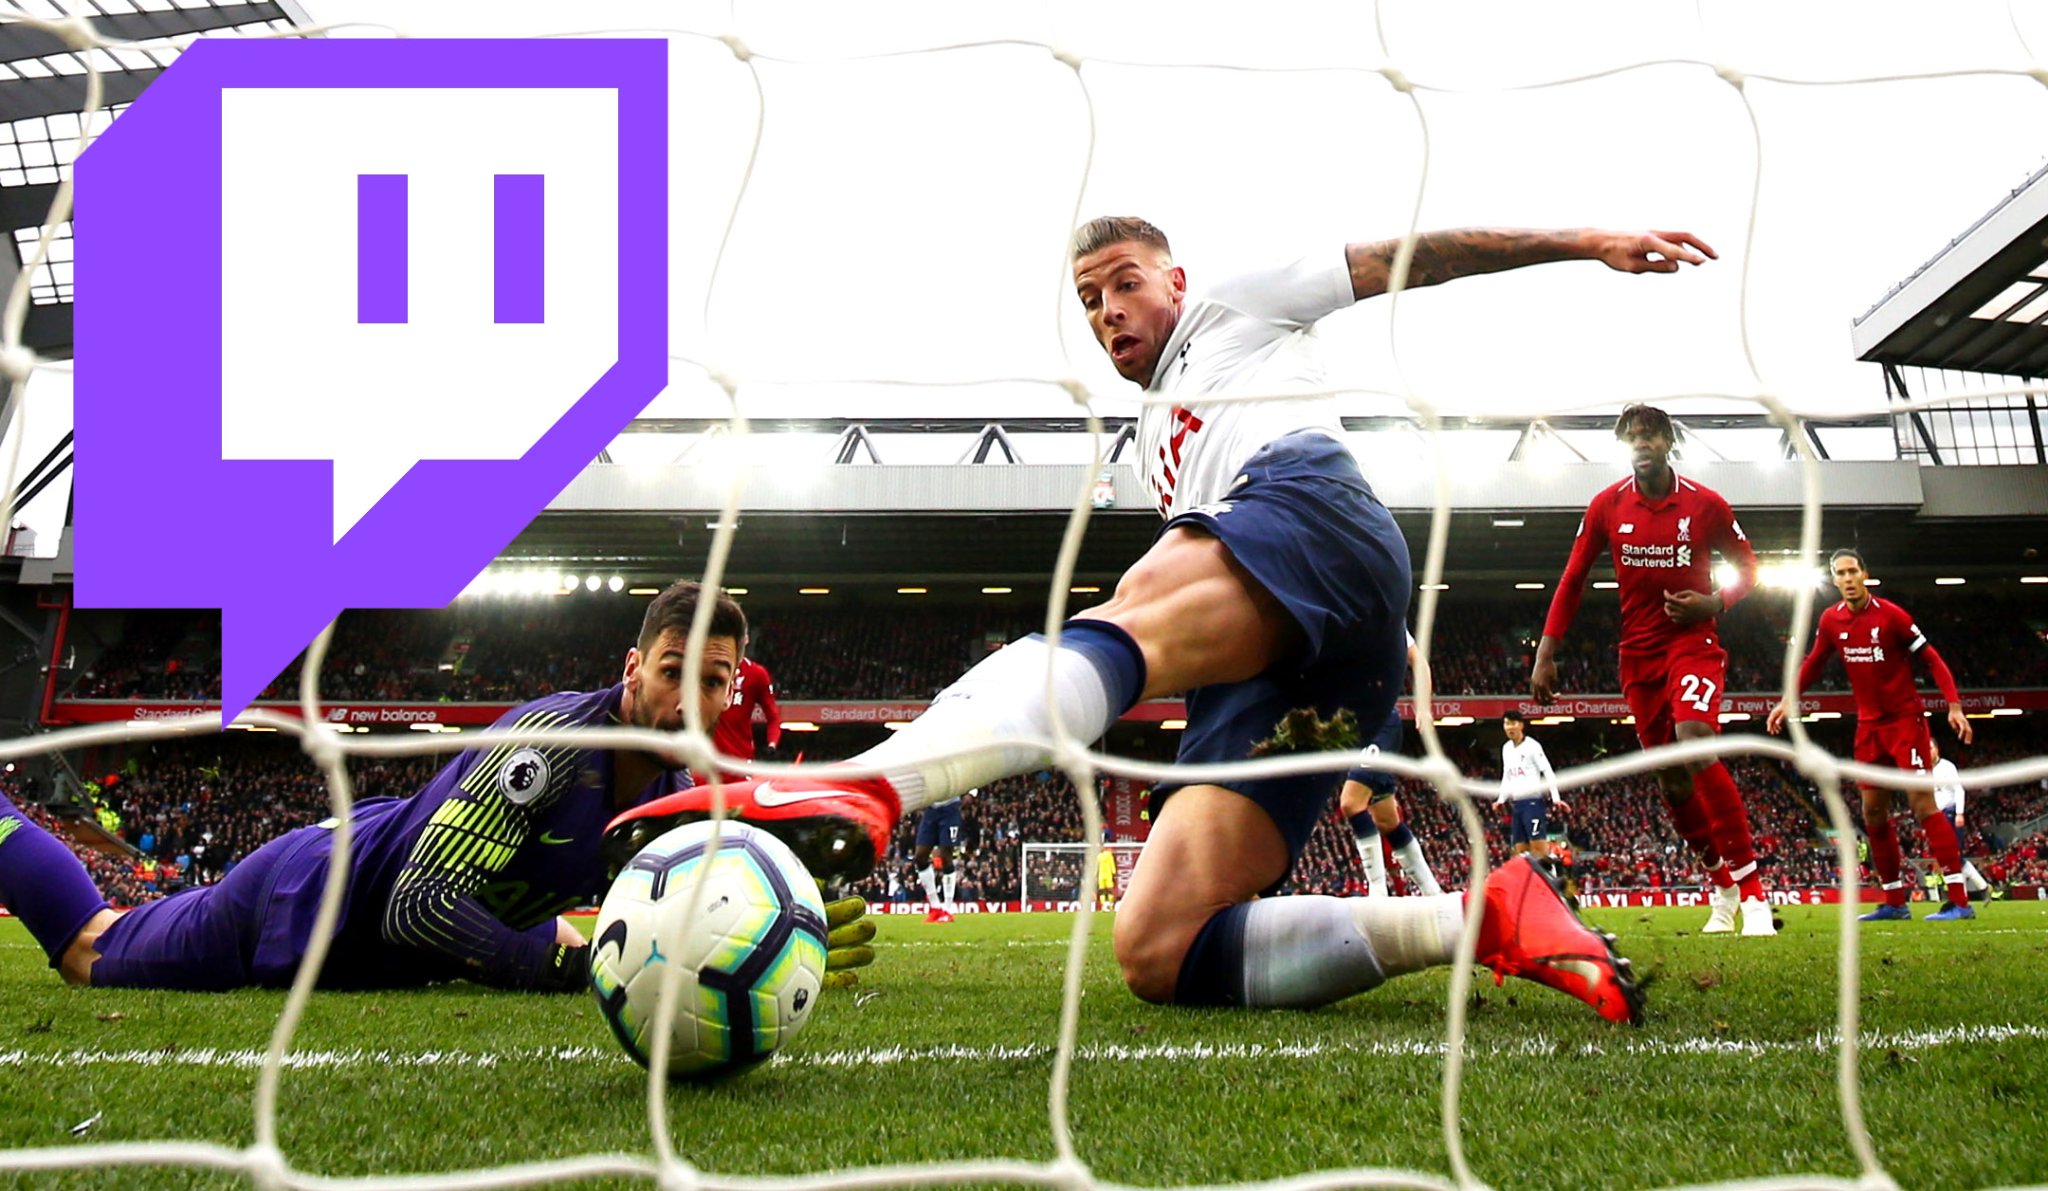 Twitch Is Being Sued For $3 BILLION Over Illegally Streamed English Premier League Soccer Games